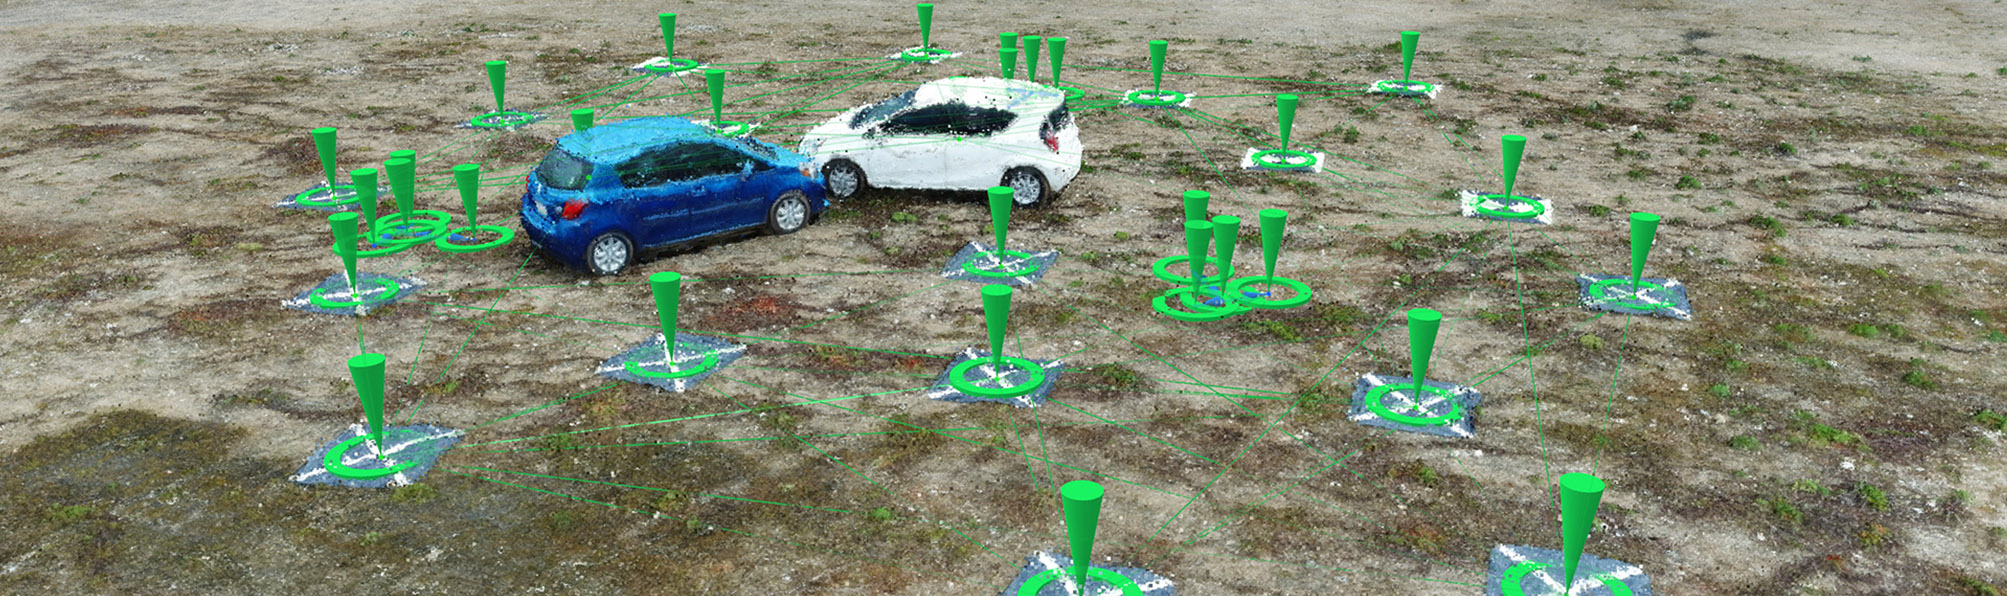 Pix4D software imagery of cars